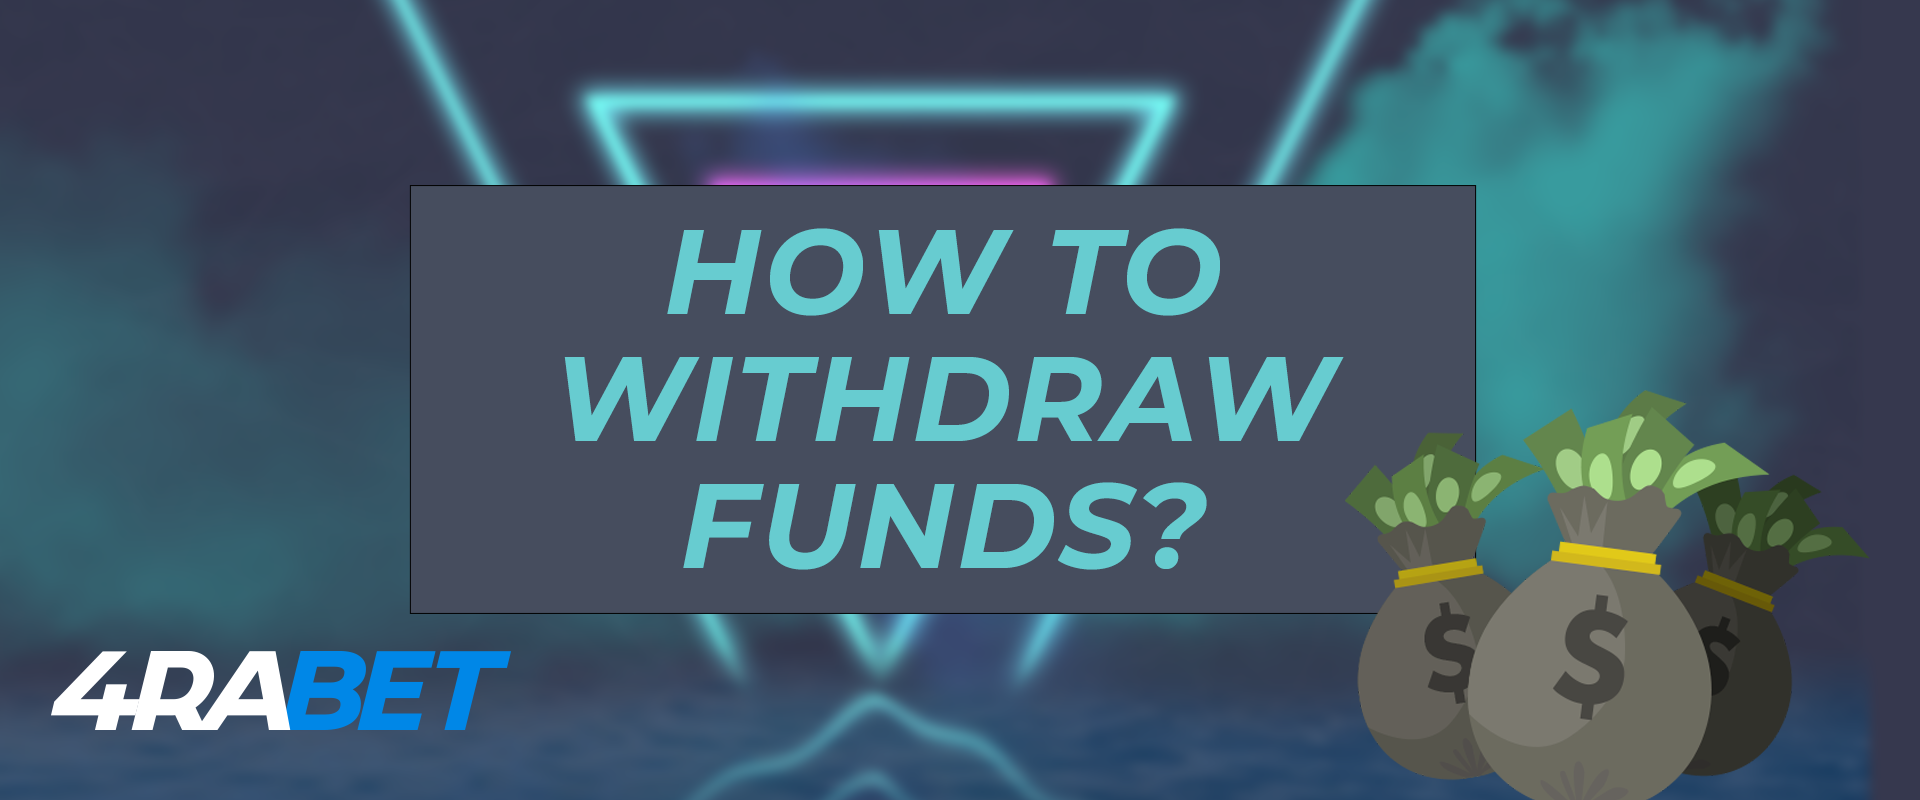 How to withdrawal money on the 4rabet.